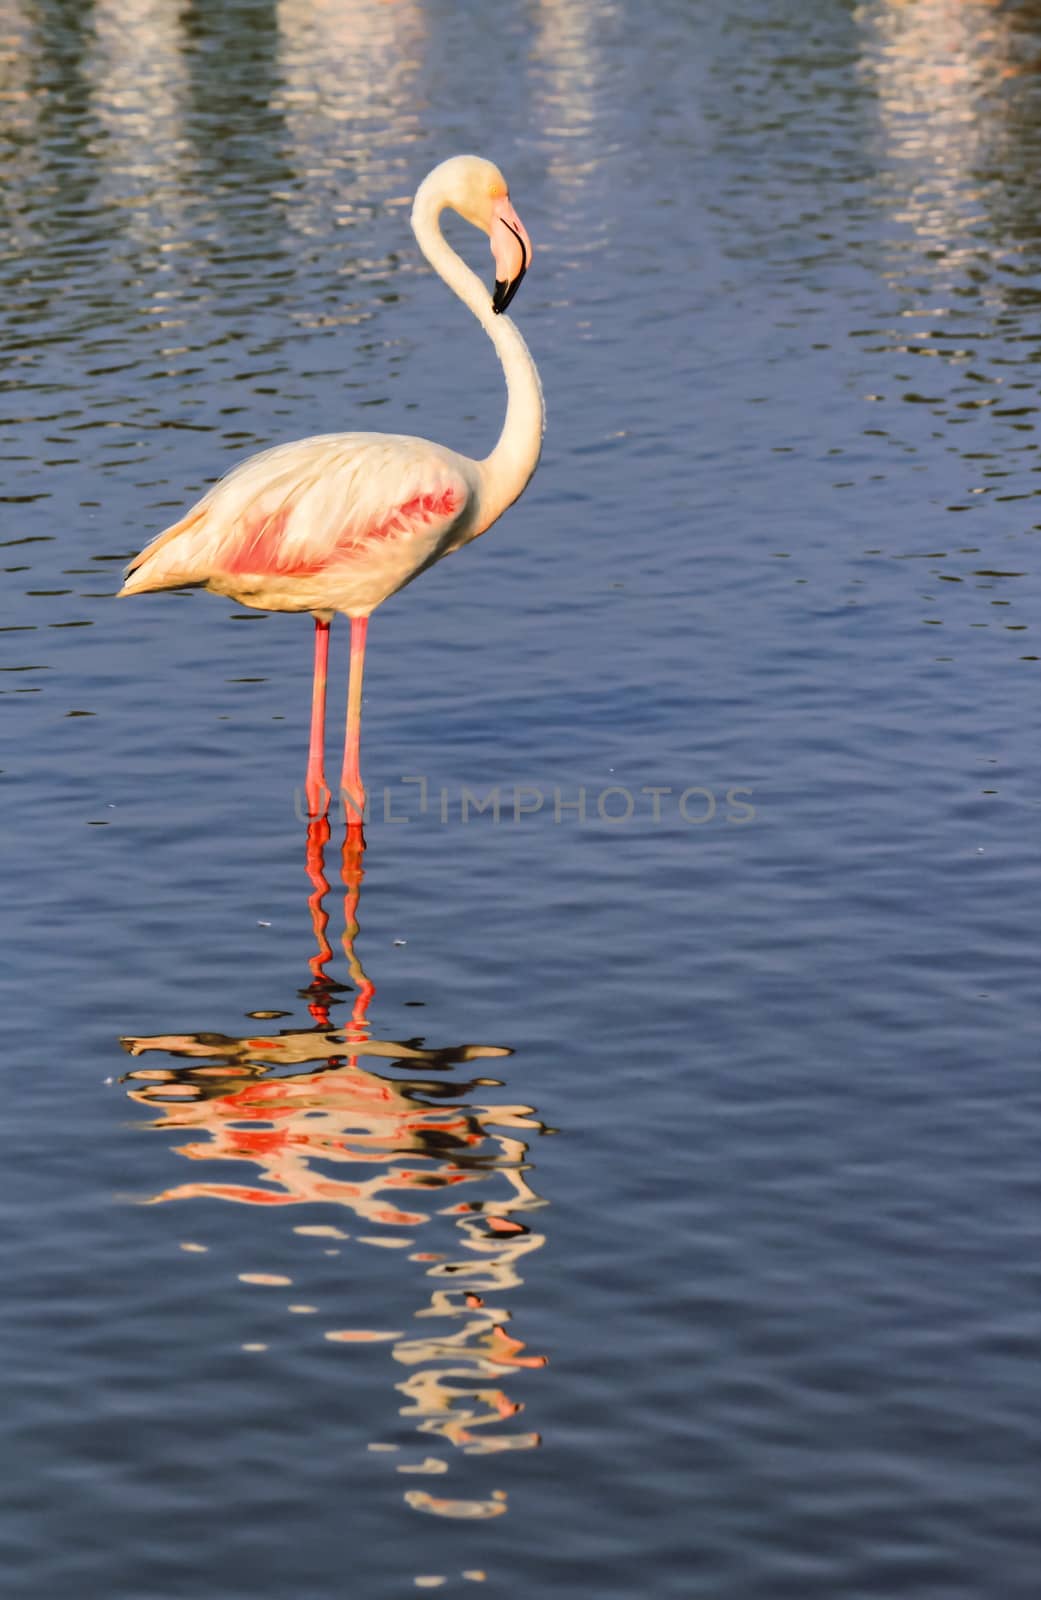 Peaceful flamingo in the water in Camargue, France by Elenaphotos21